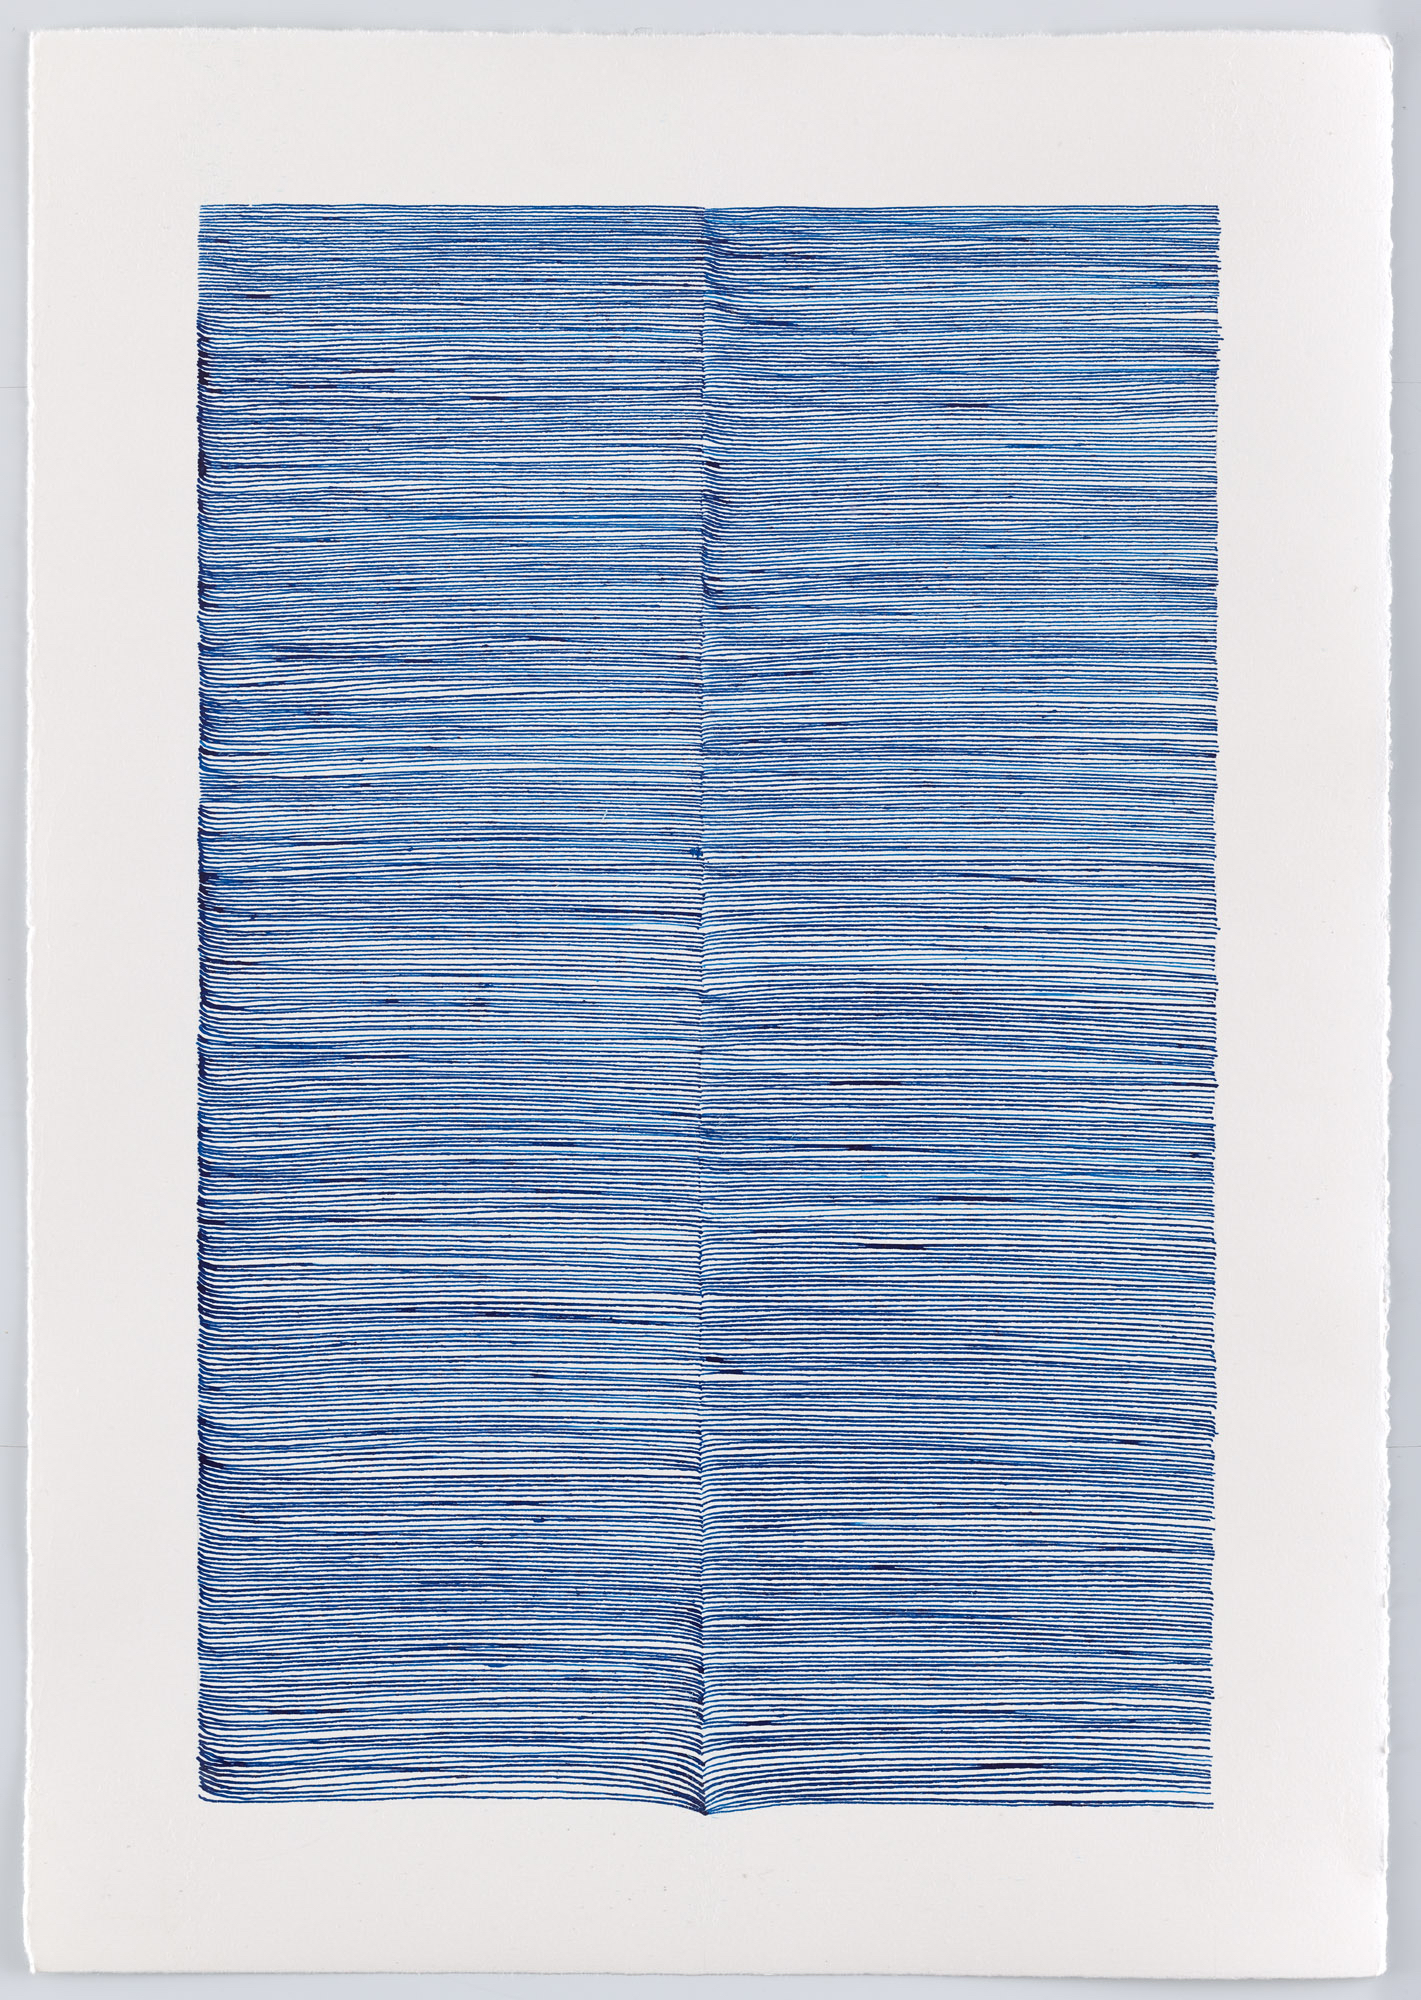 BK P13006 | untitled | blue ink on paper | 42x29cm | 2016 | private collection berlin